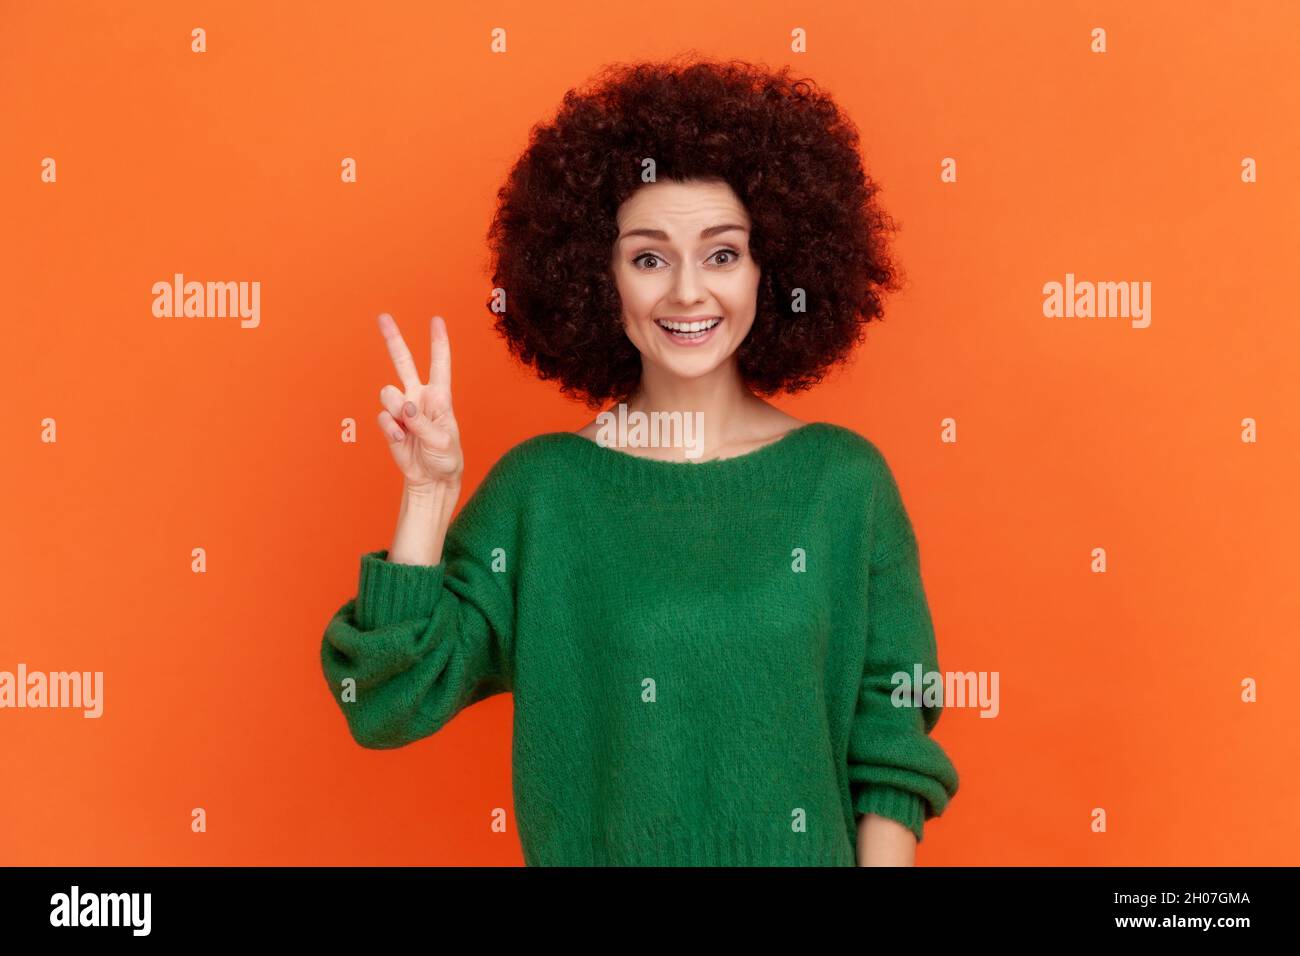 Happy friendly woman with Afro hairstyle wearing green casual style sweater looking at camera with toothy smile, showing v sign, peace gesture. Indoor studio shot isolated on orange background. Stock Photo